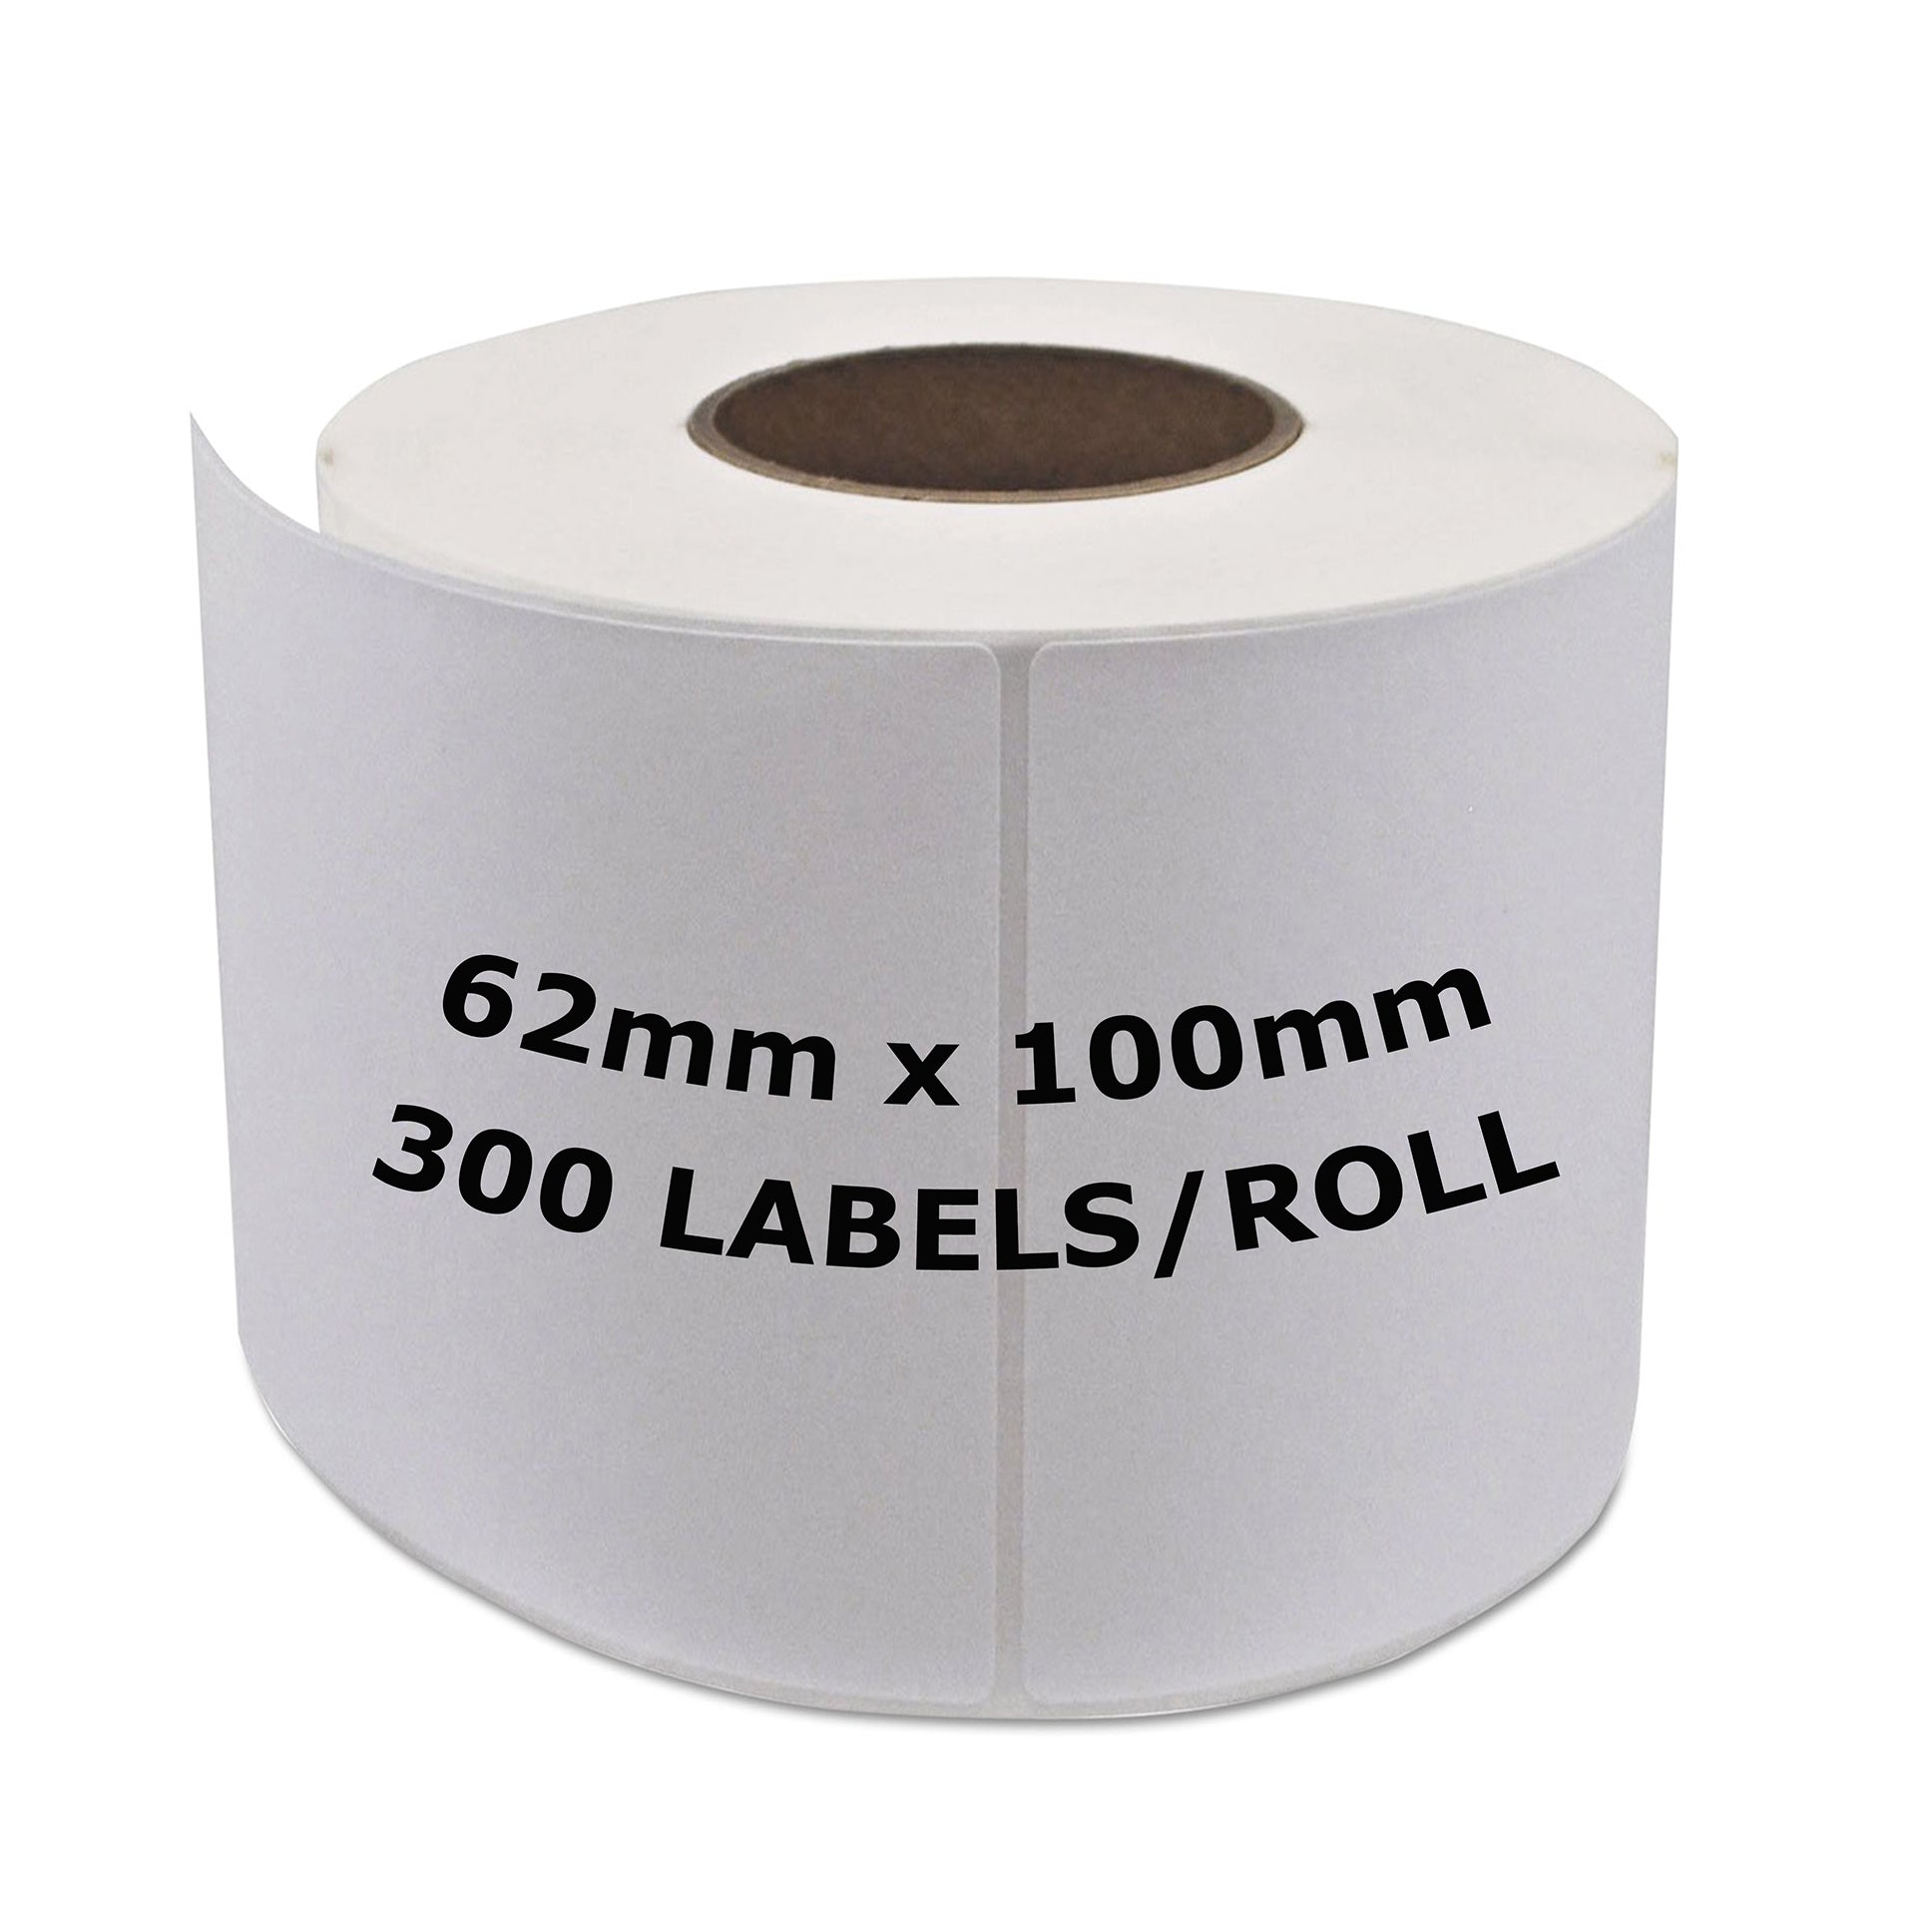 BROTHER Compatible Labels 62mm x 100mm 300 Labels/Roll [DK11202]